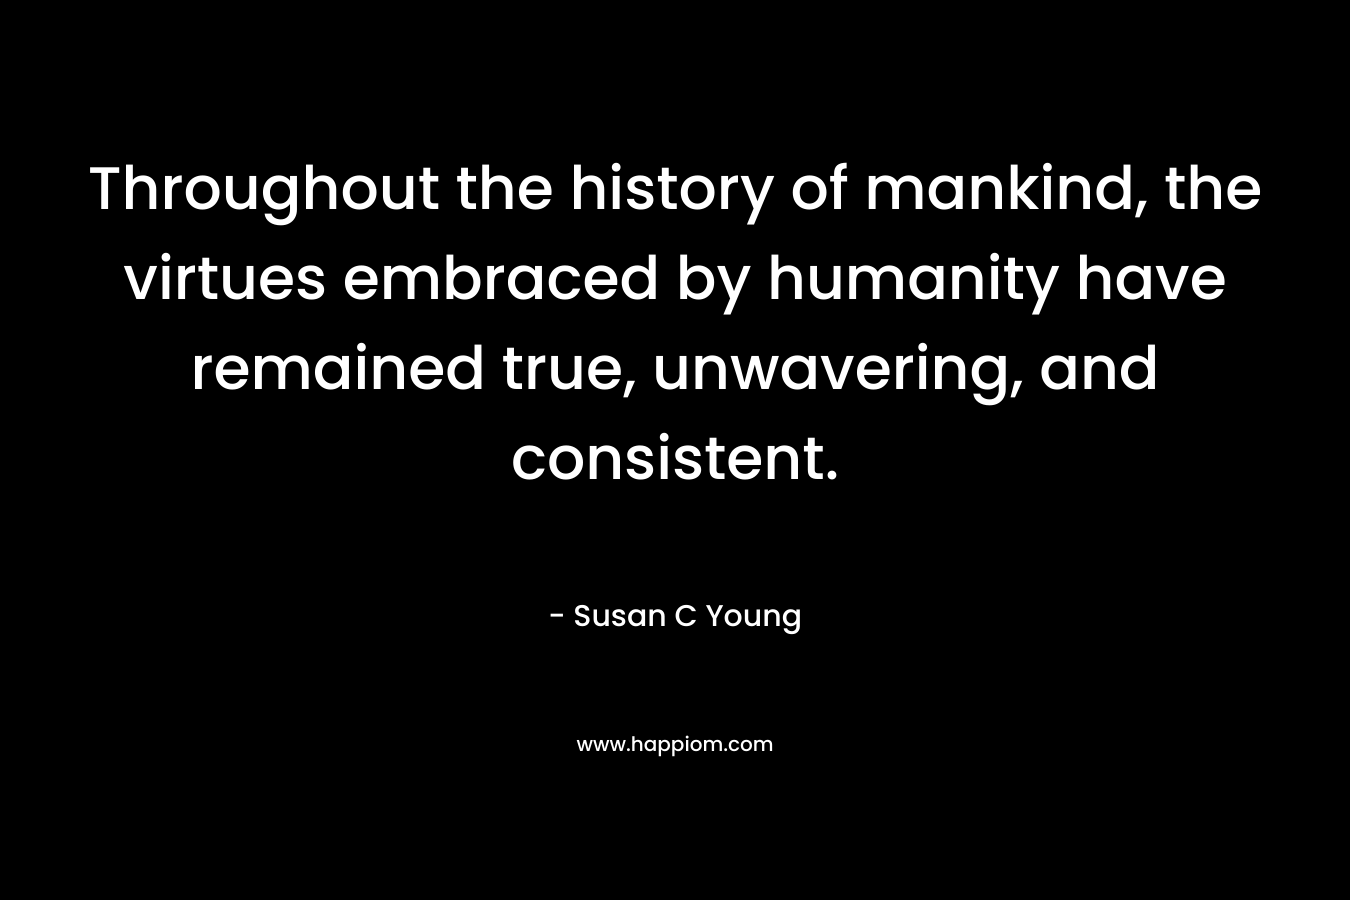 Throughout the history of mankind, the virtues embraced by humanity have remained true, unwavering, and consistent.